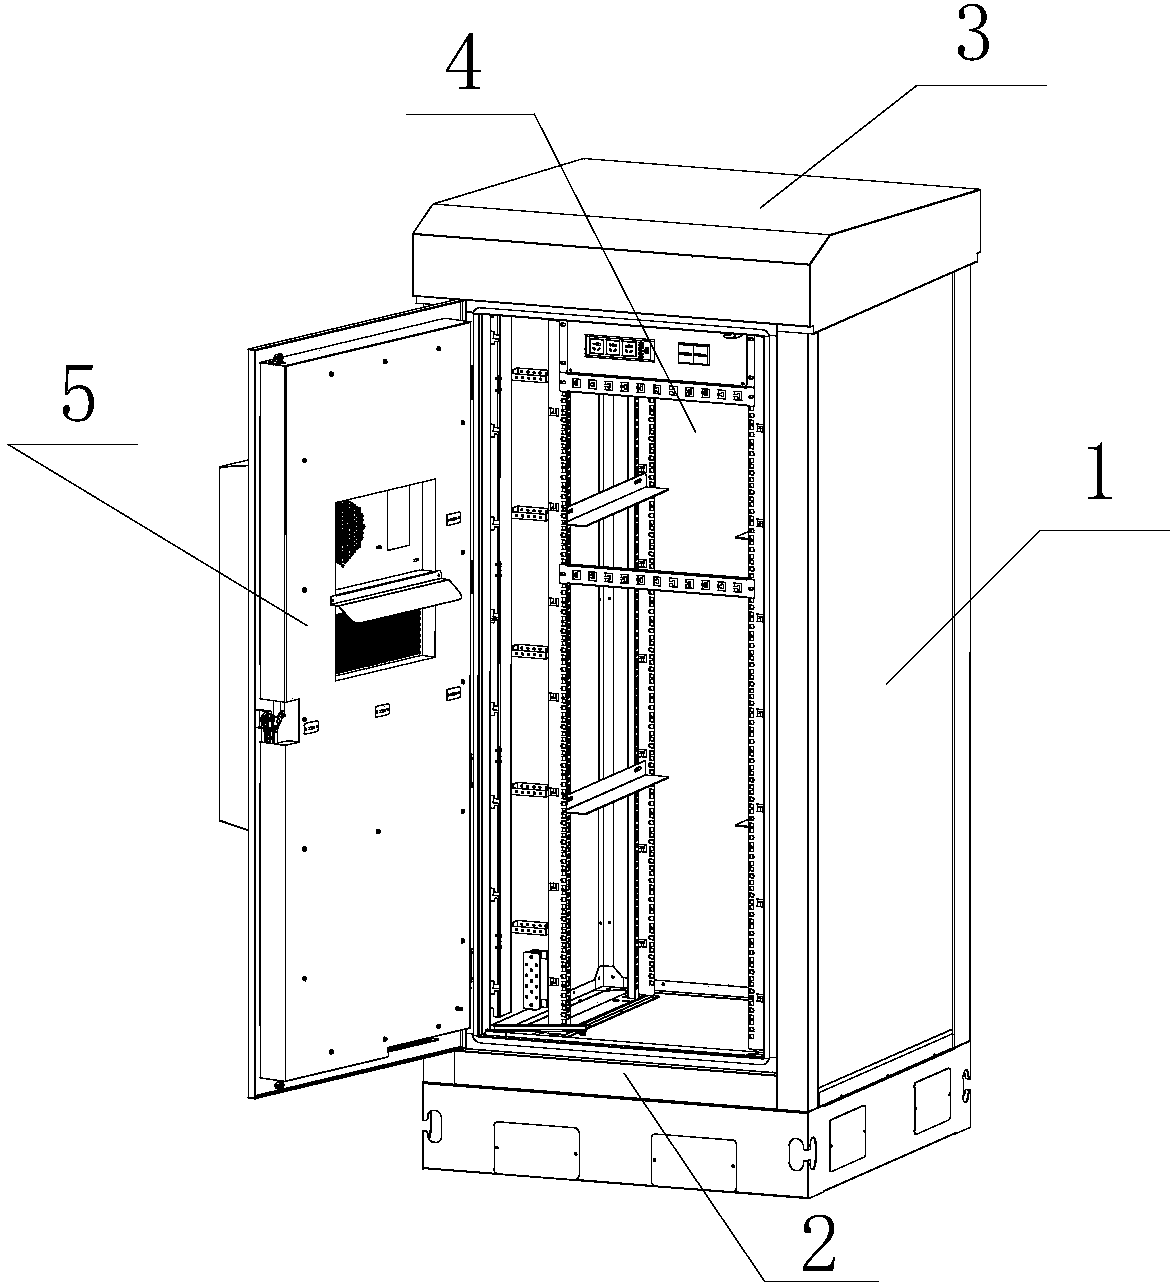 Low-energy consumption insulated outdoor cabinet